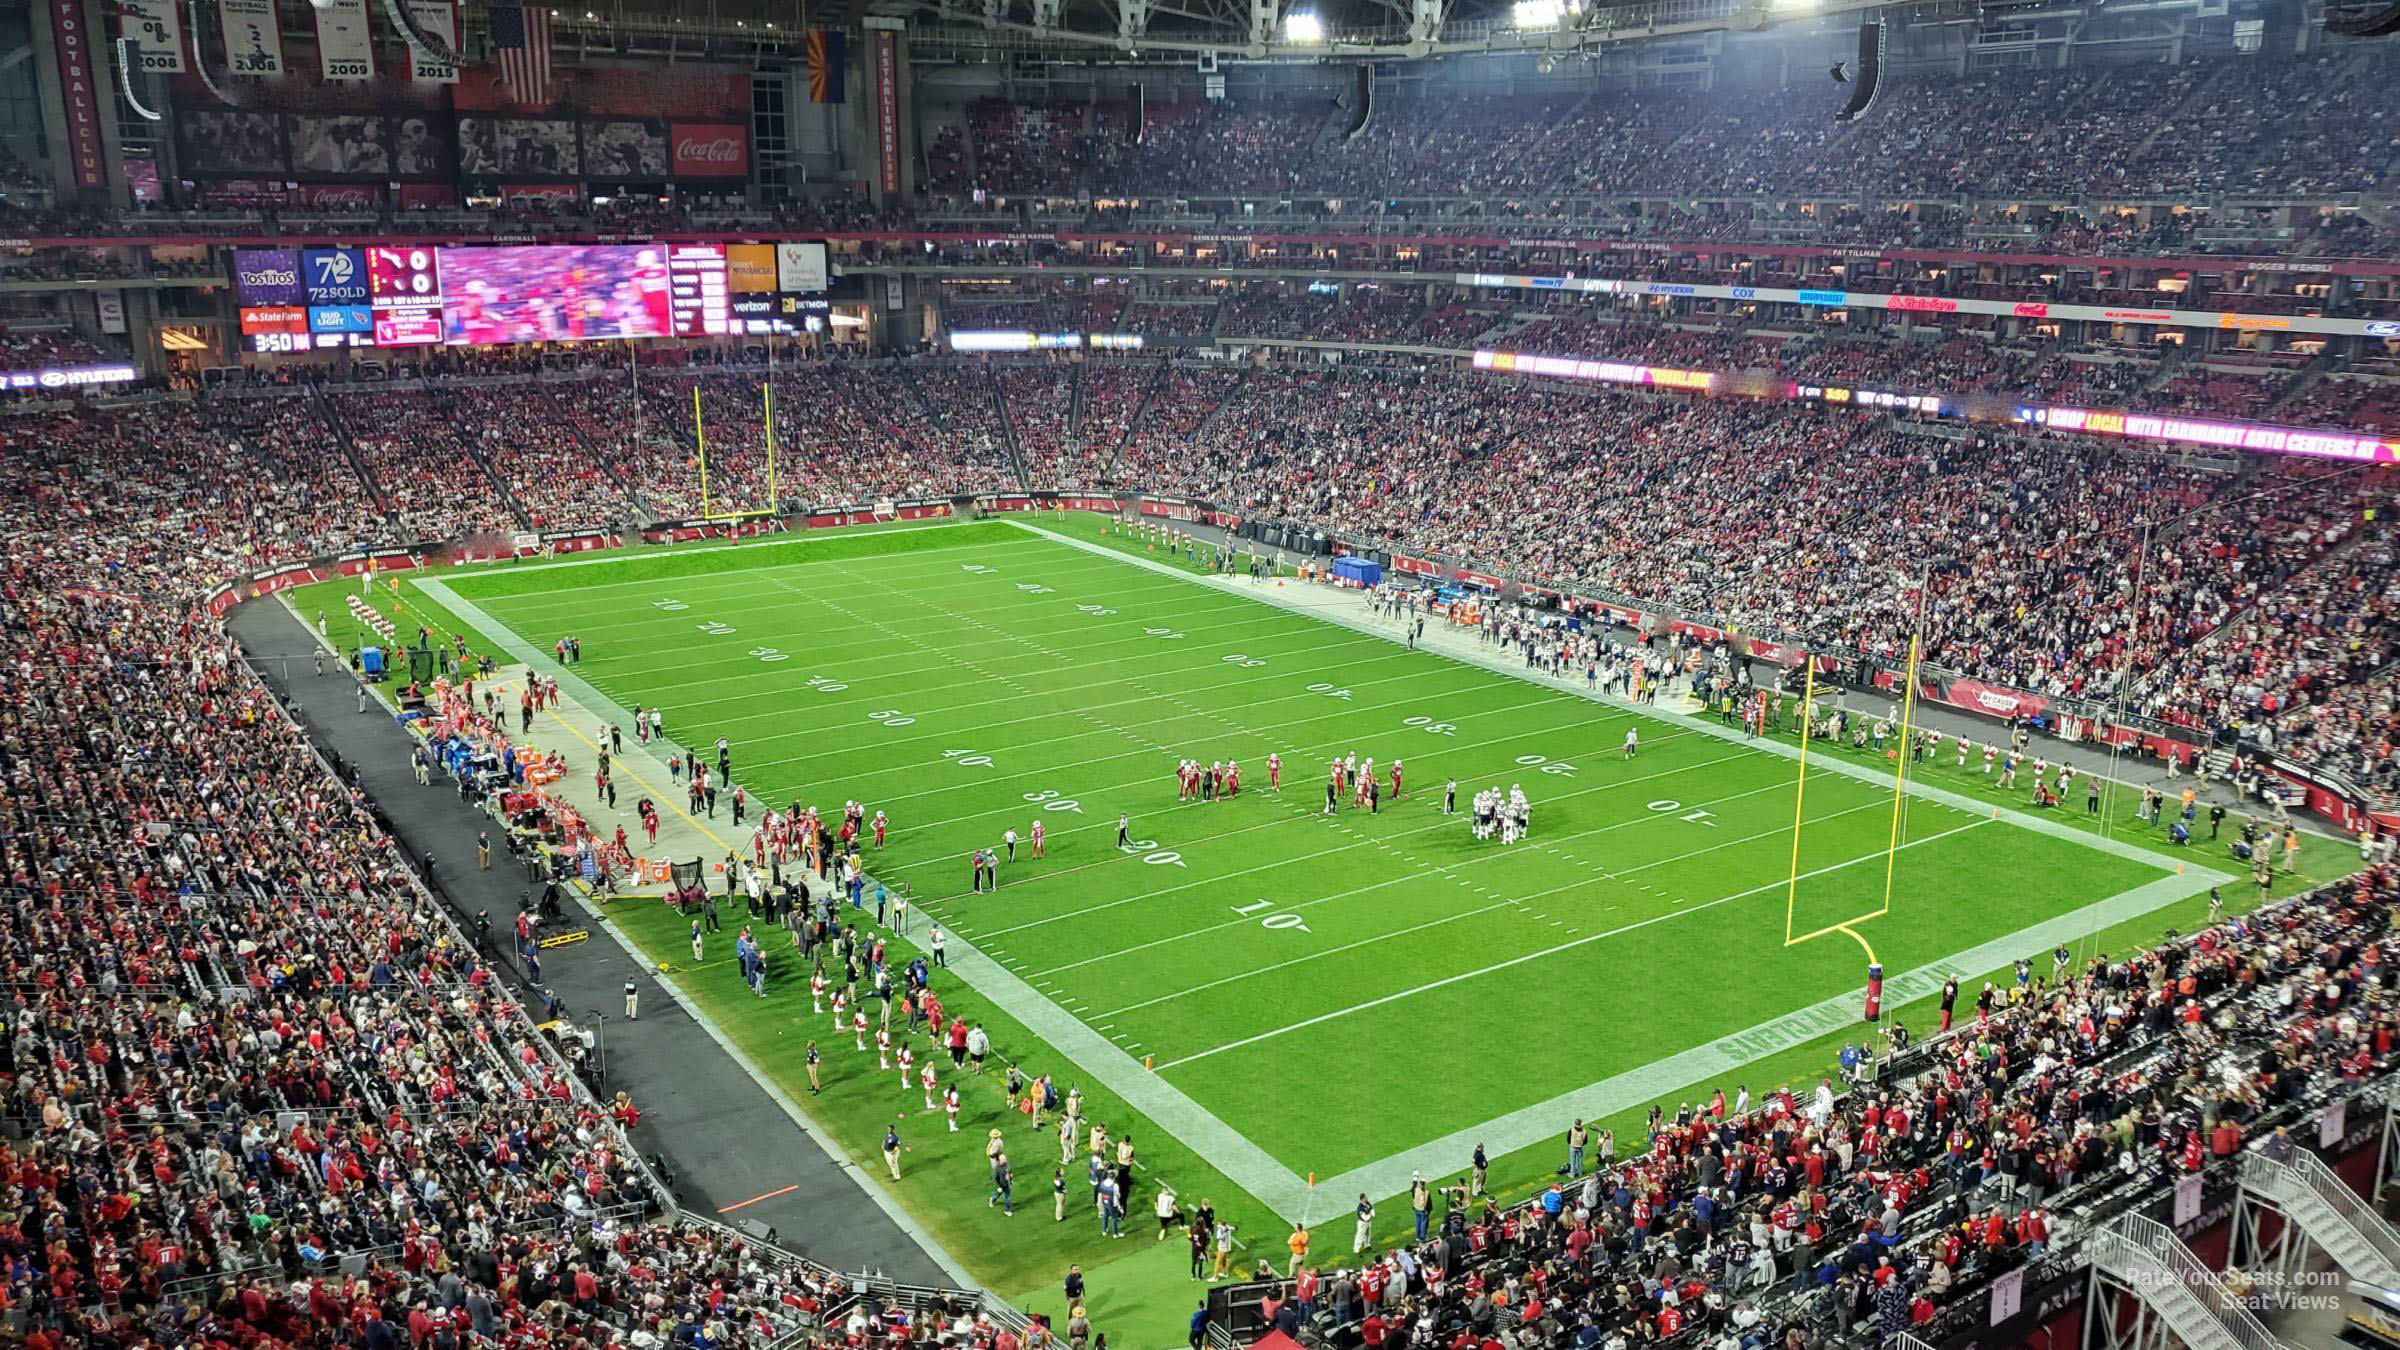 section 402, row 1 seat view  for football - state farm stadium